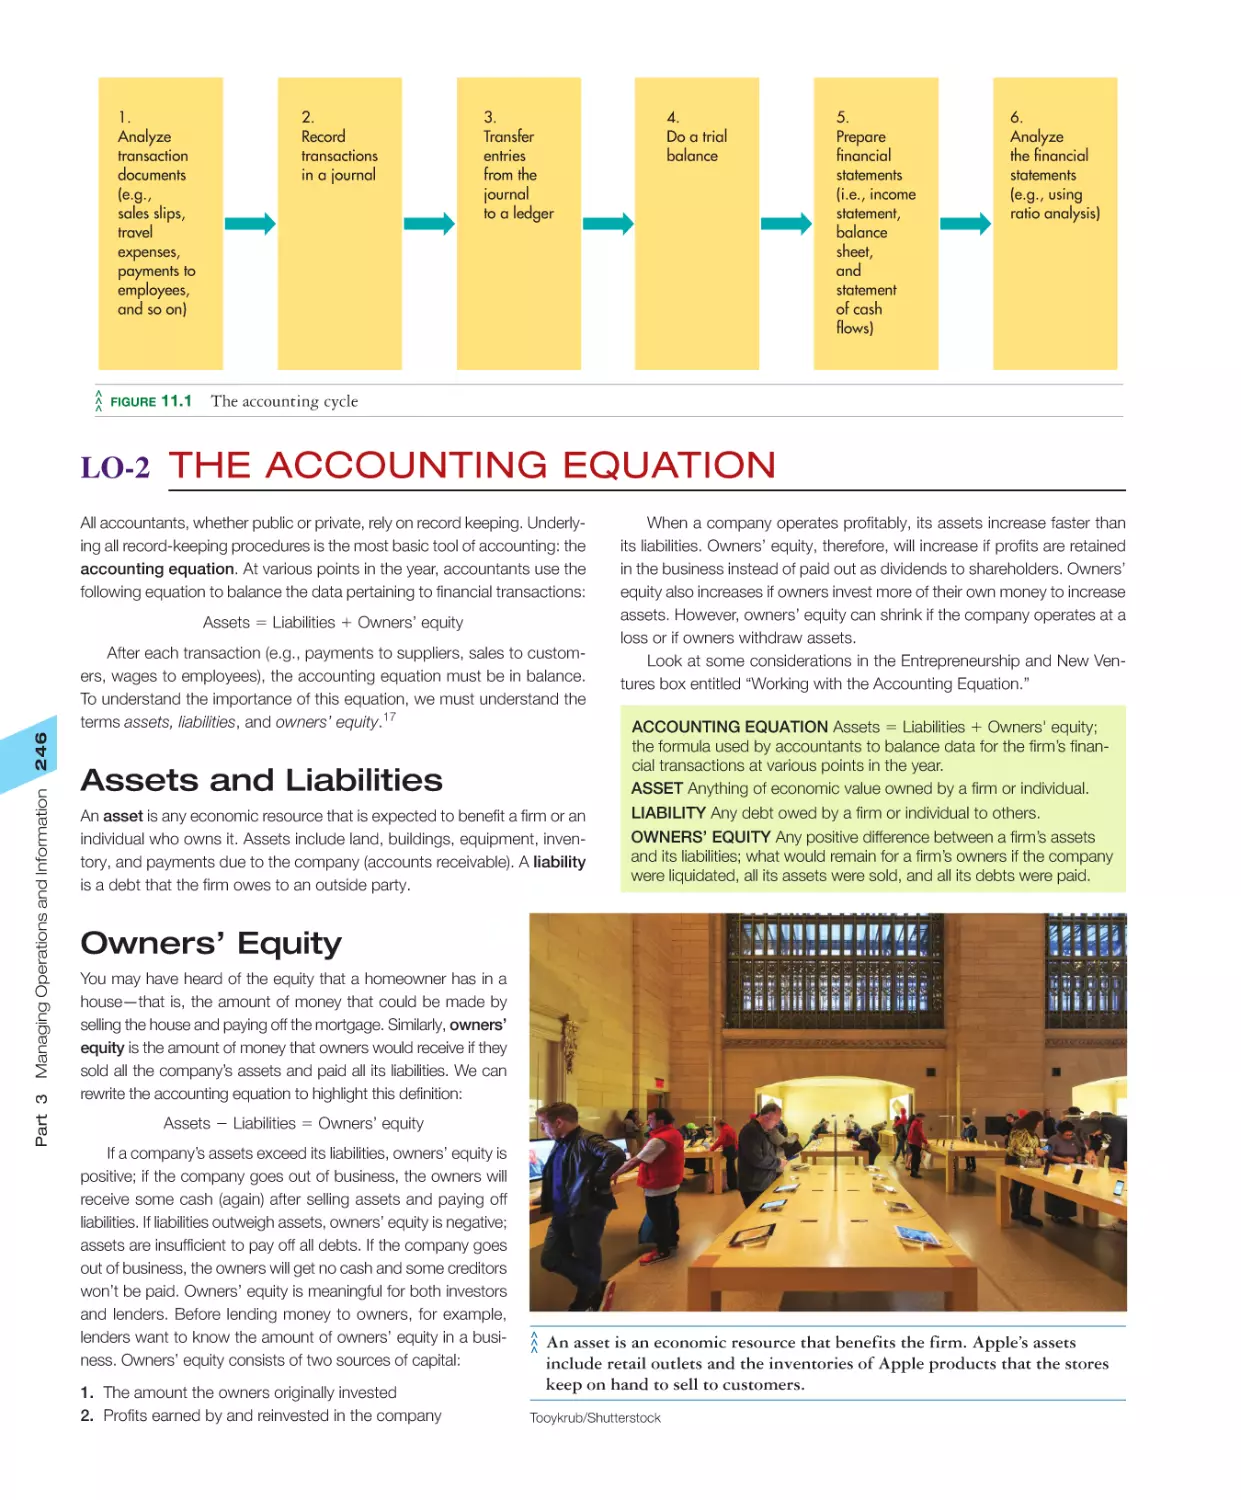 LO‐2 The Accounting Equation
Owners’ Equity